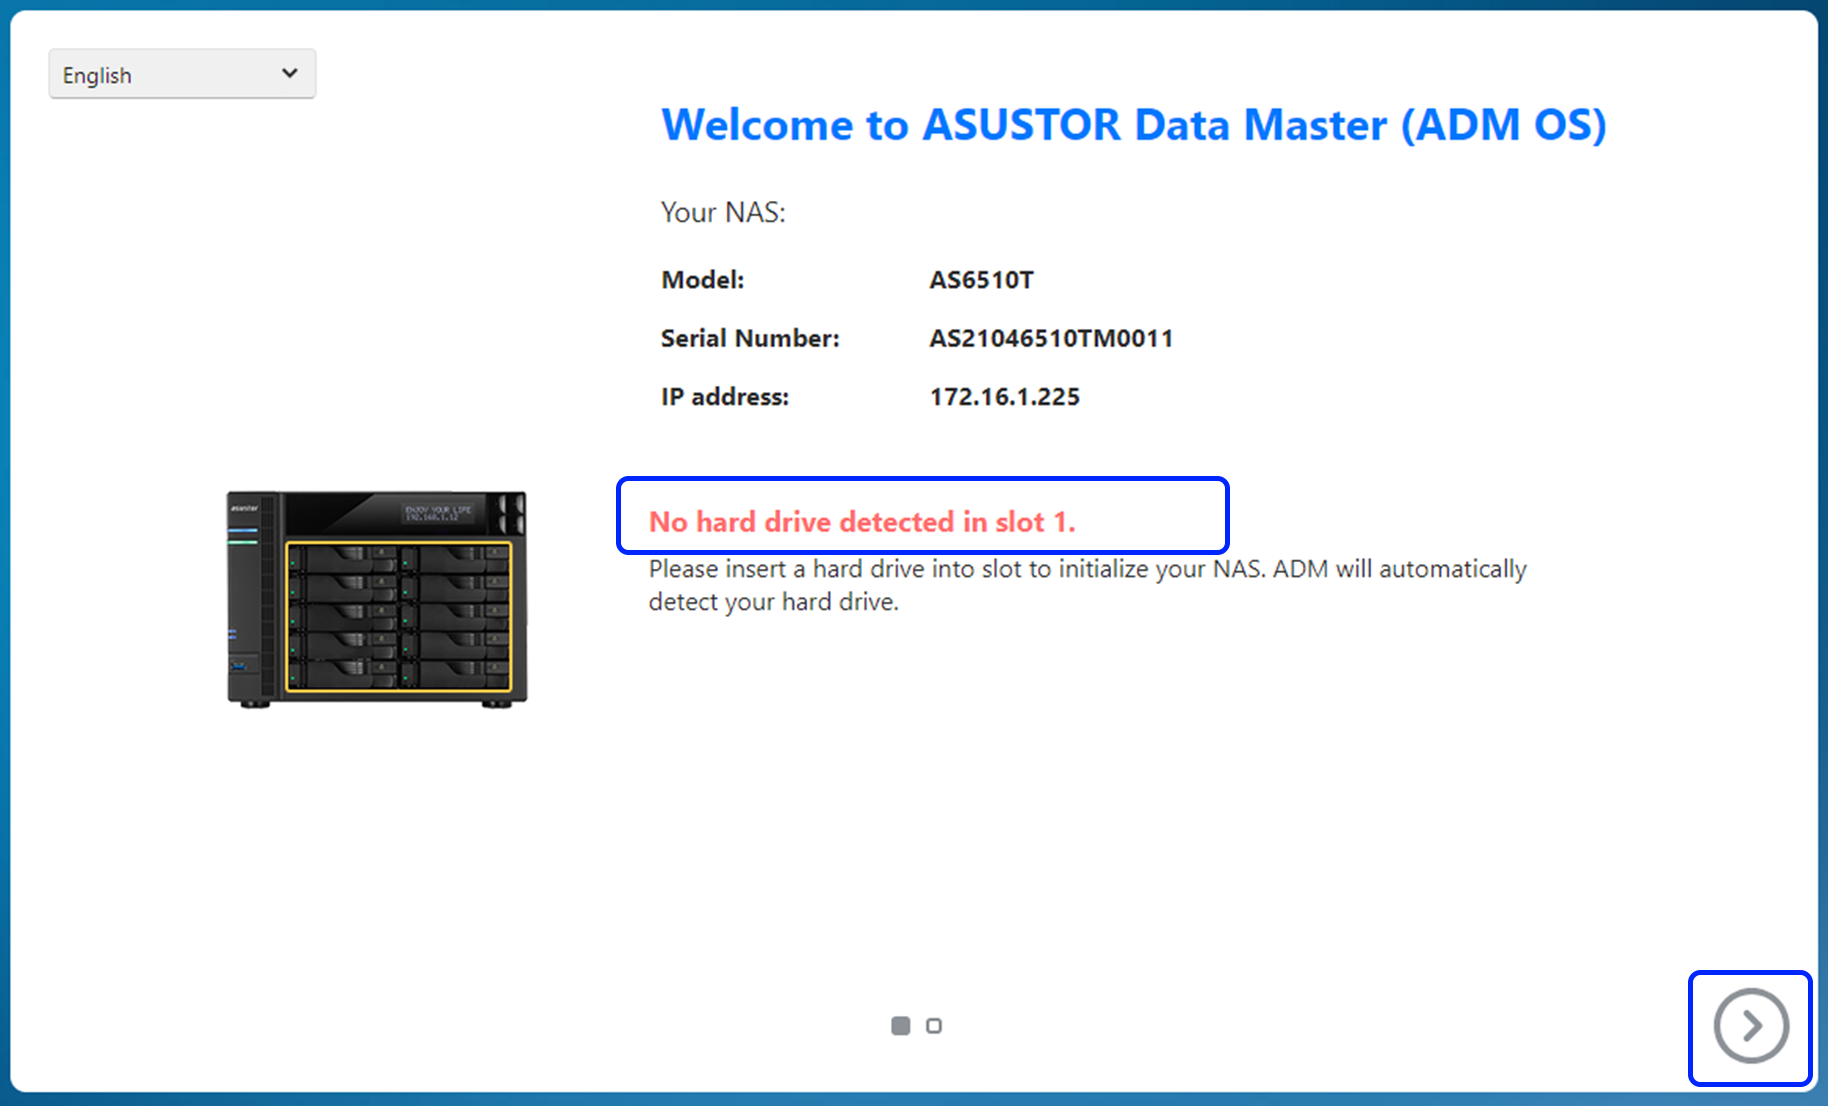 Asustor NAS reportedly under ransomware attack, owners asked to take their  devices offline